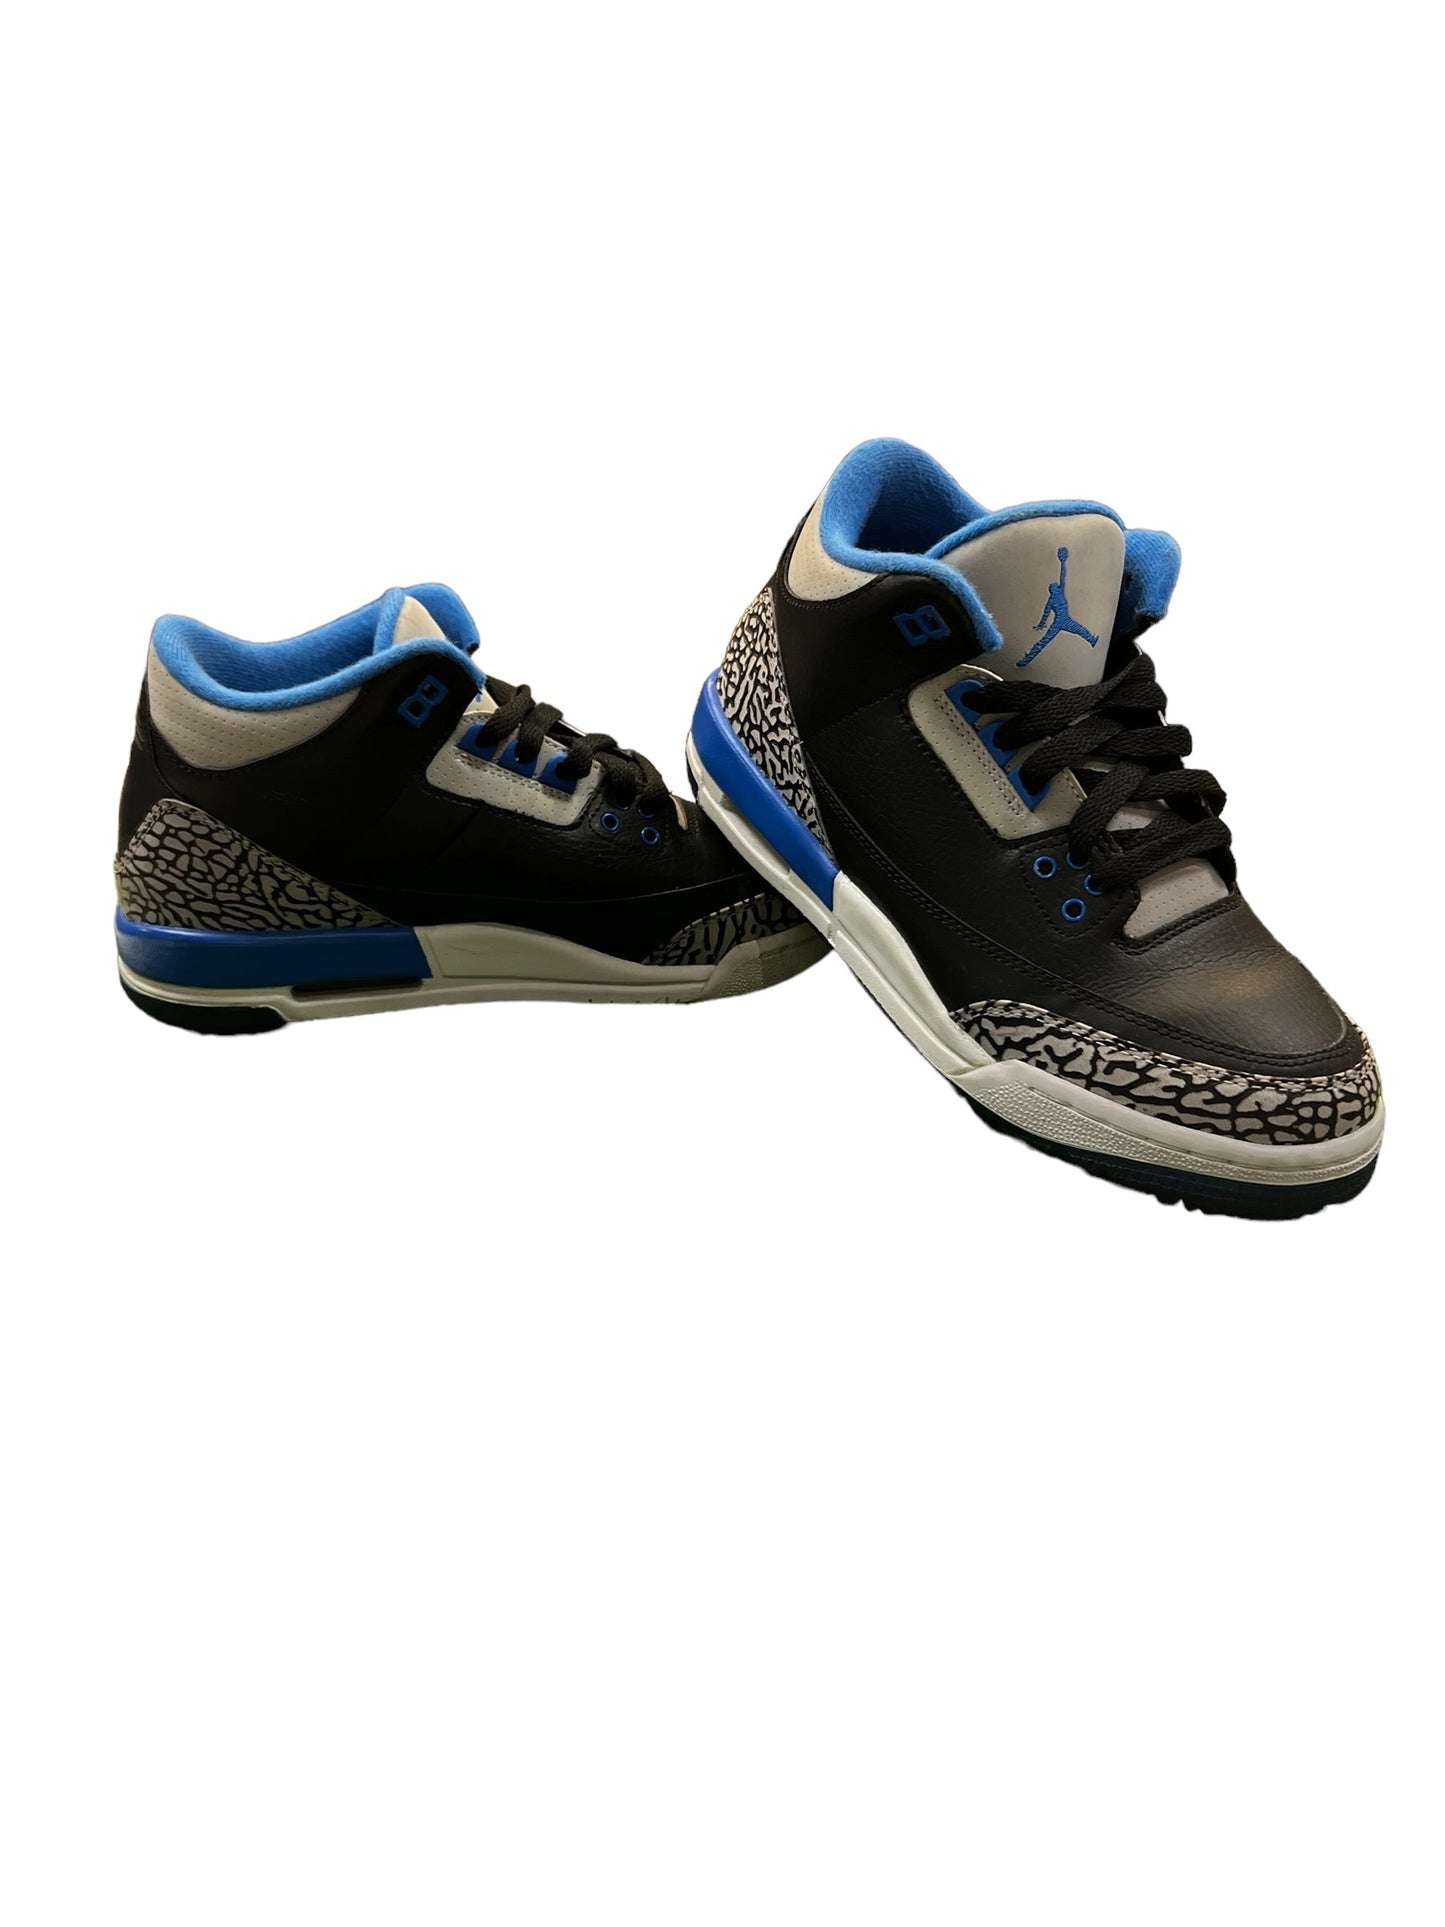 Shoes Athletic By Jordan  Size: 8